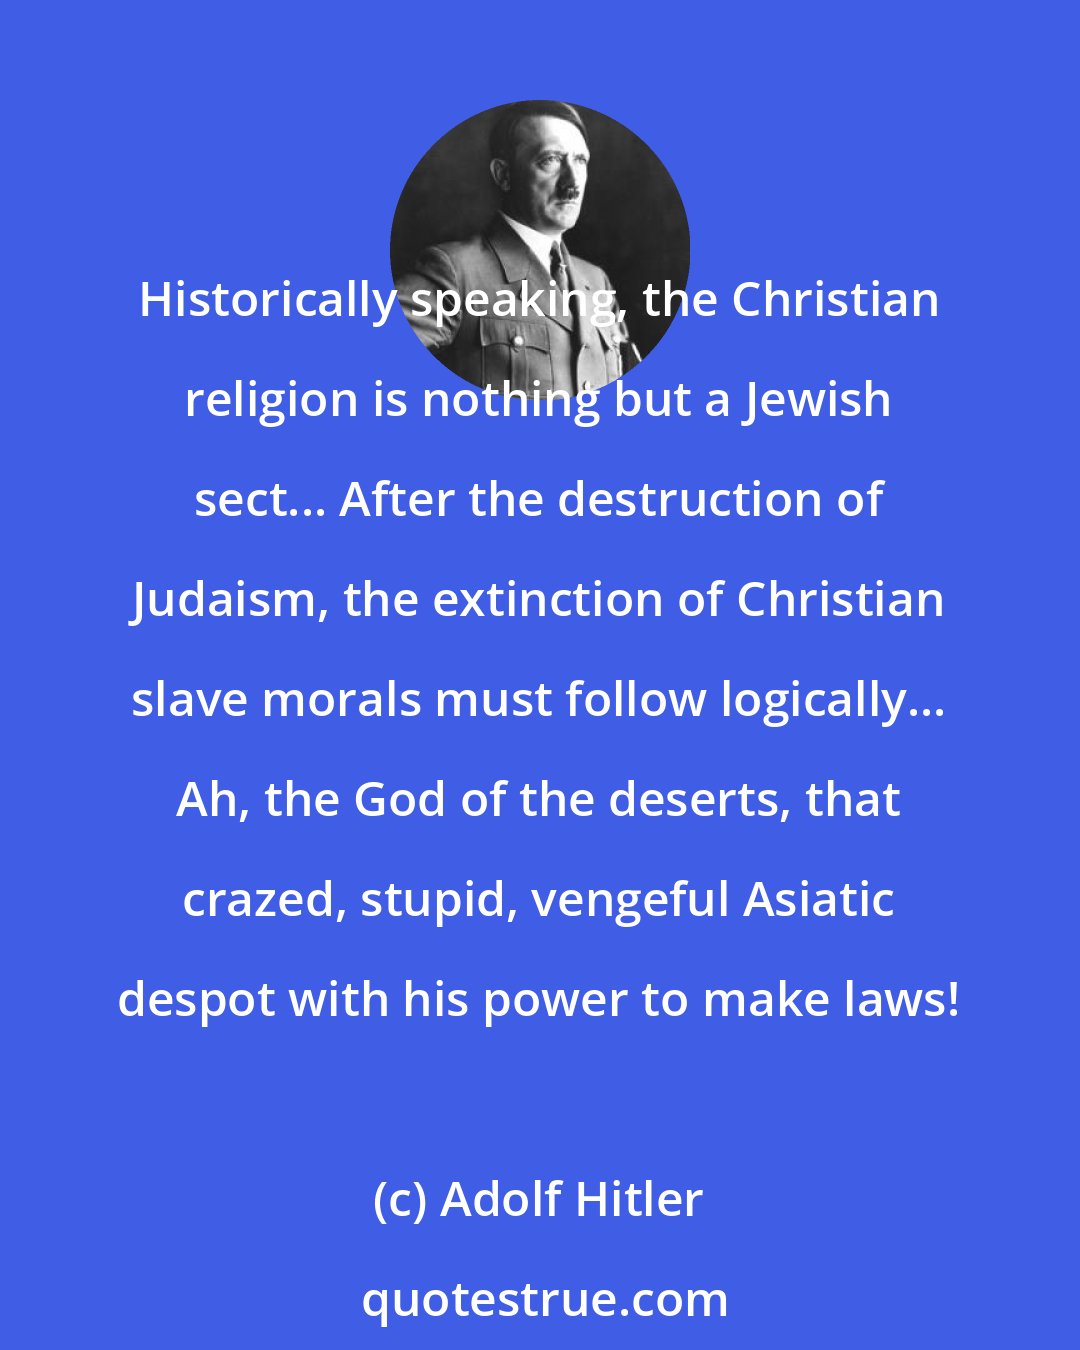 Adolf Hitler: Historically speaking, the Christian religion is nothing but a Jewish sect... After the destruction of Judaism, the extinction of Christian slave morals must follow logically... Ah, the God of the deserts, that crazed, stupid, vengeful Asiatic despot with his power to make laws!